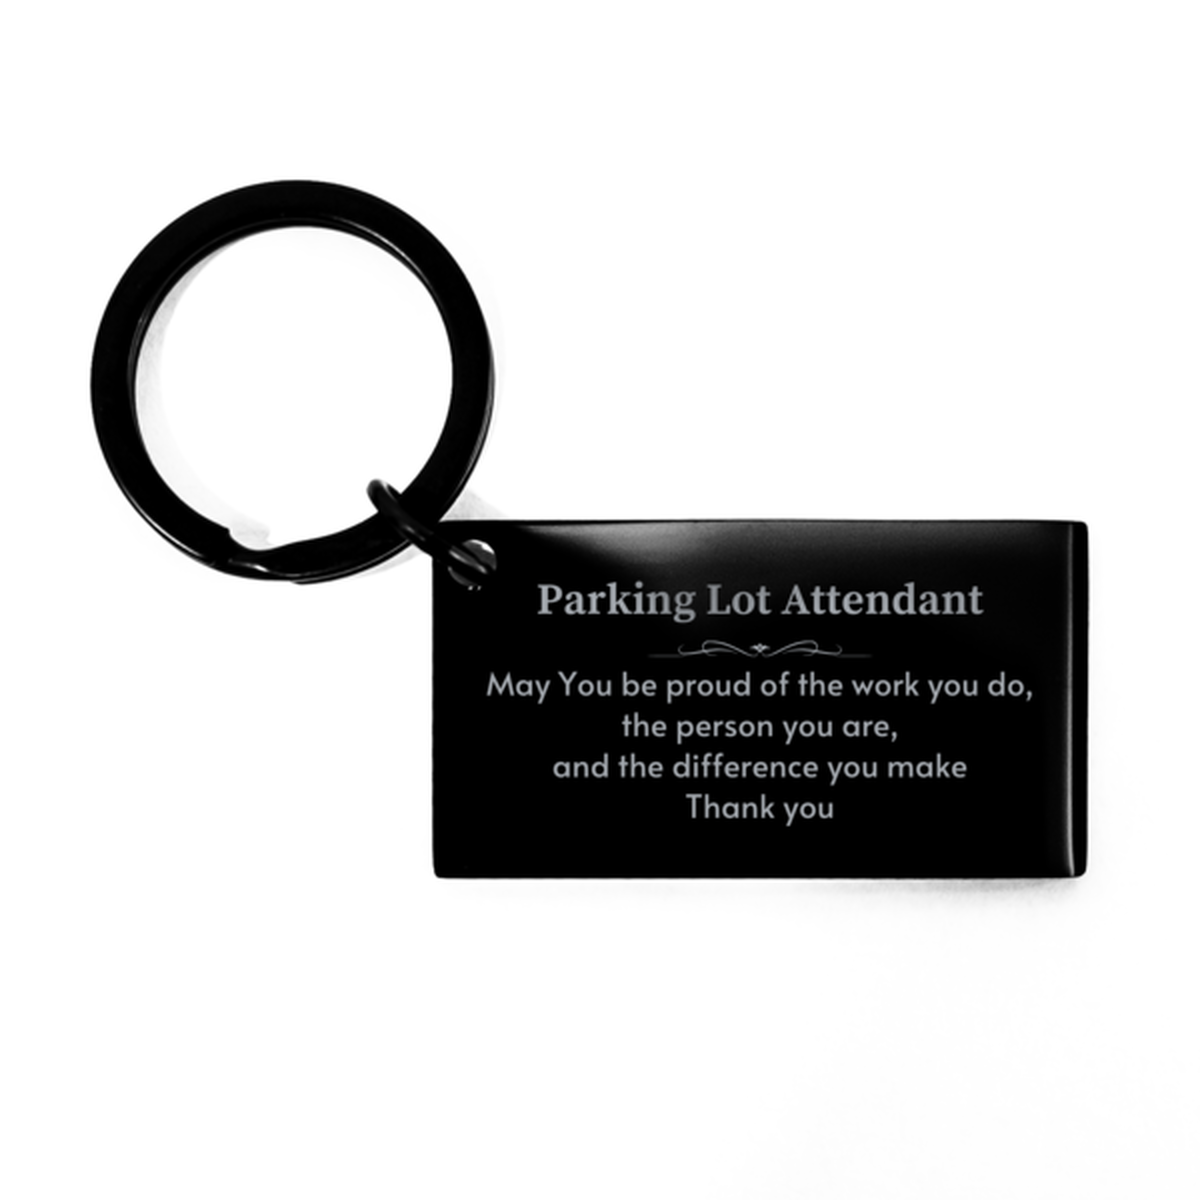 Heartwarming Keychain Retirement Coworkers Gifts for Parking Lot Attendant, Psychologist May You be proud of the work you do, the person you are Gifts for Boss Men Women Friends